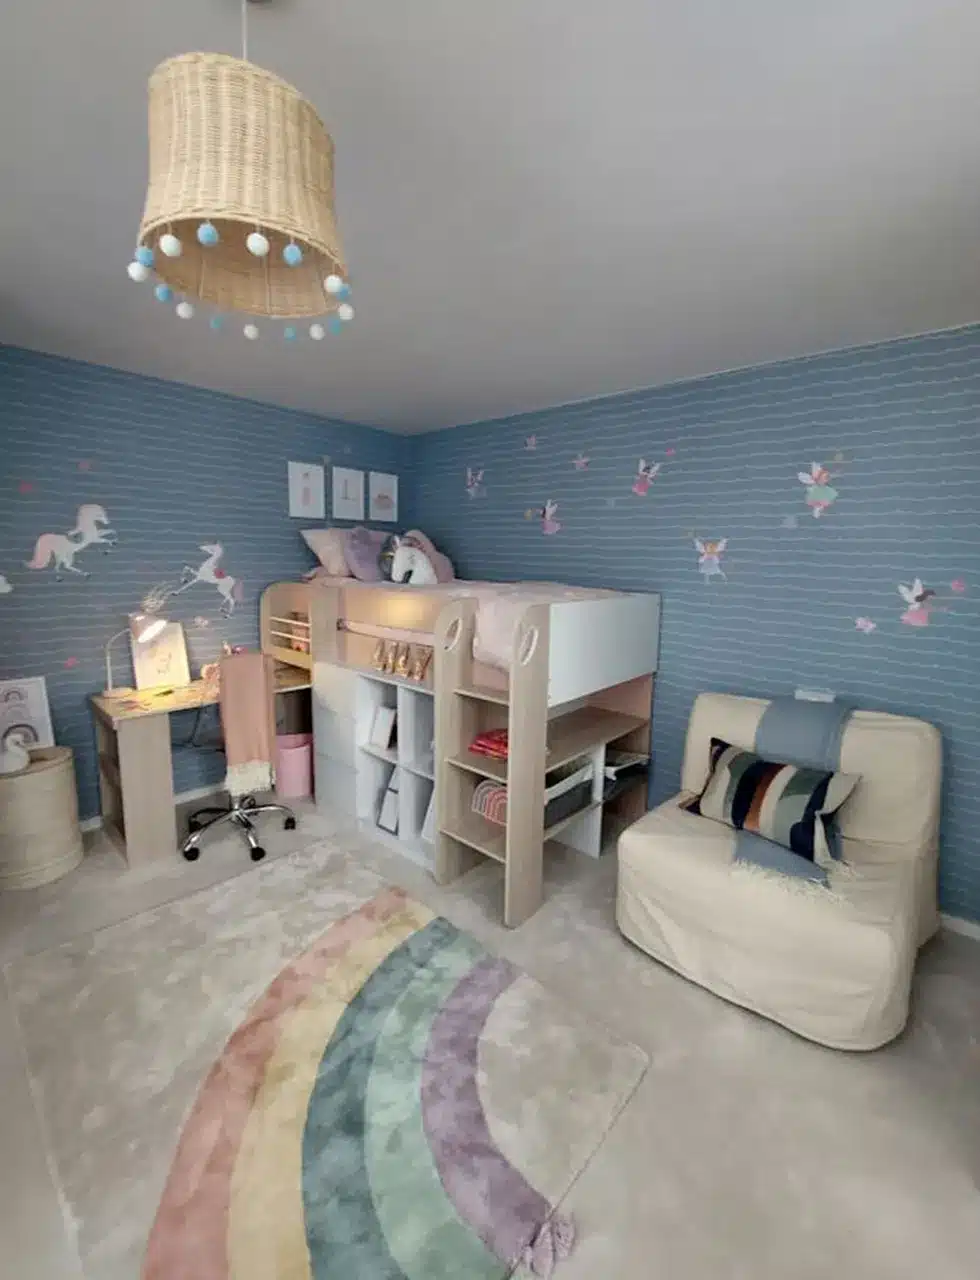 A child's room designed by Katharine Pooleys interior design team, as part of charity project Decorate a Childs Life by The Childhood Trust